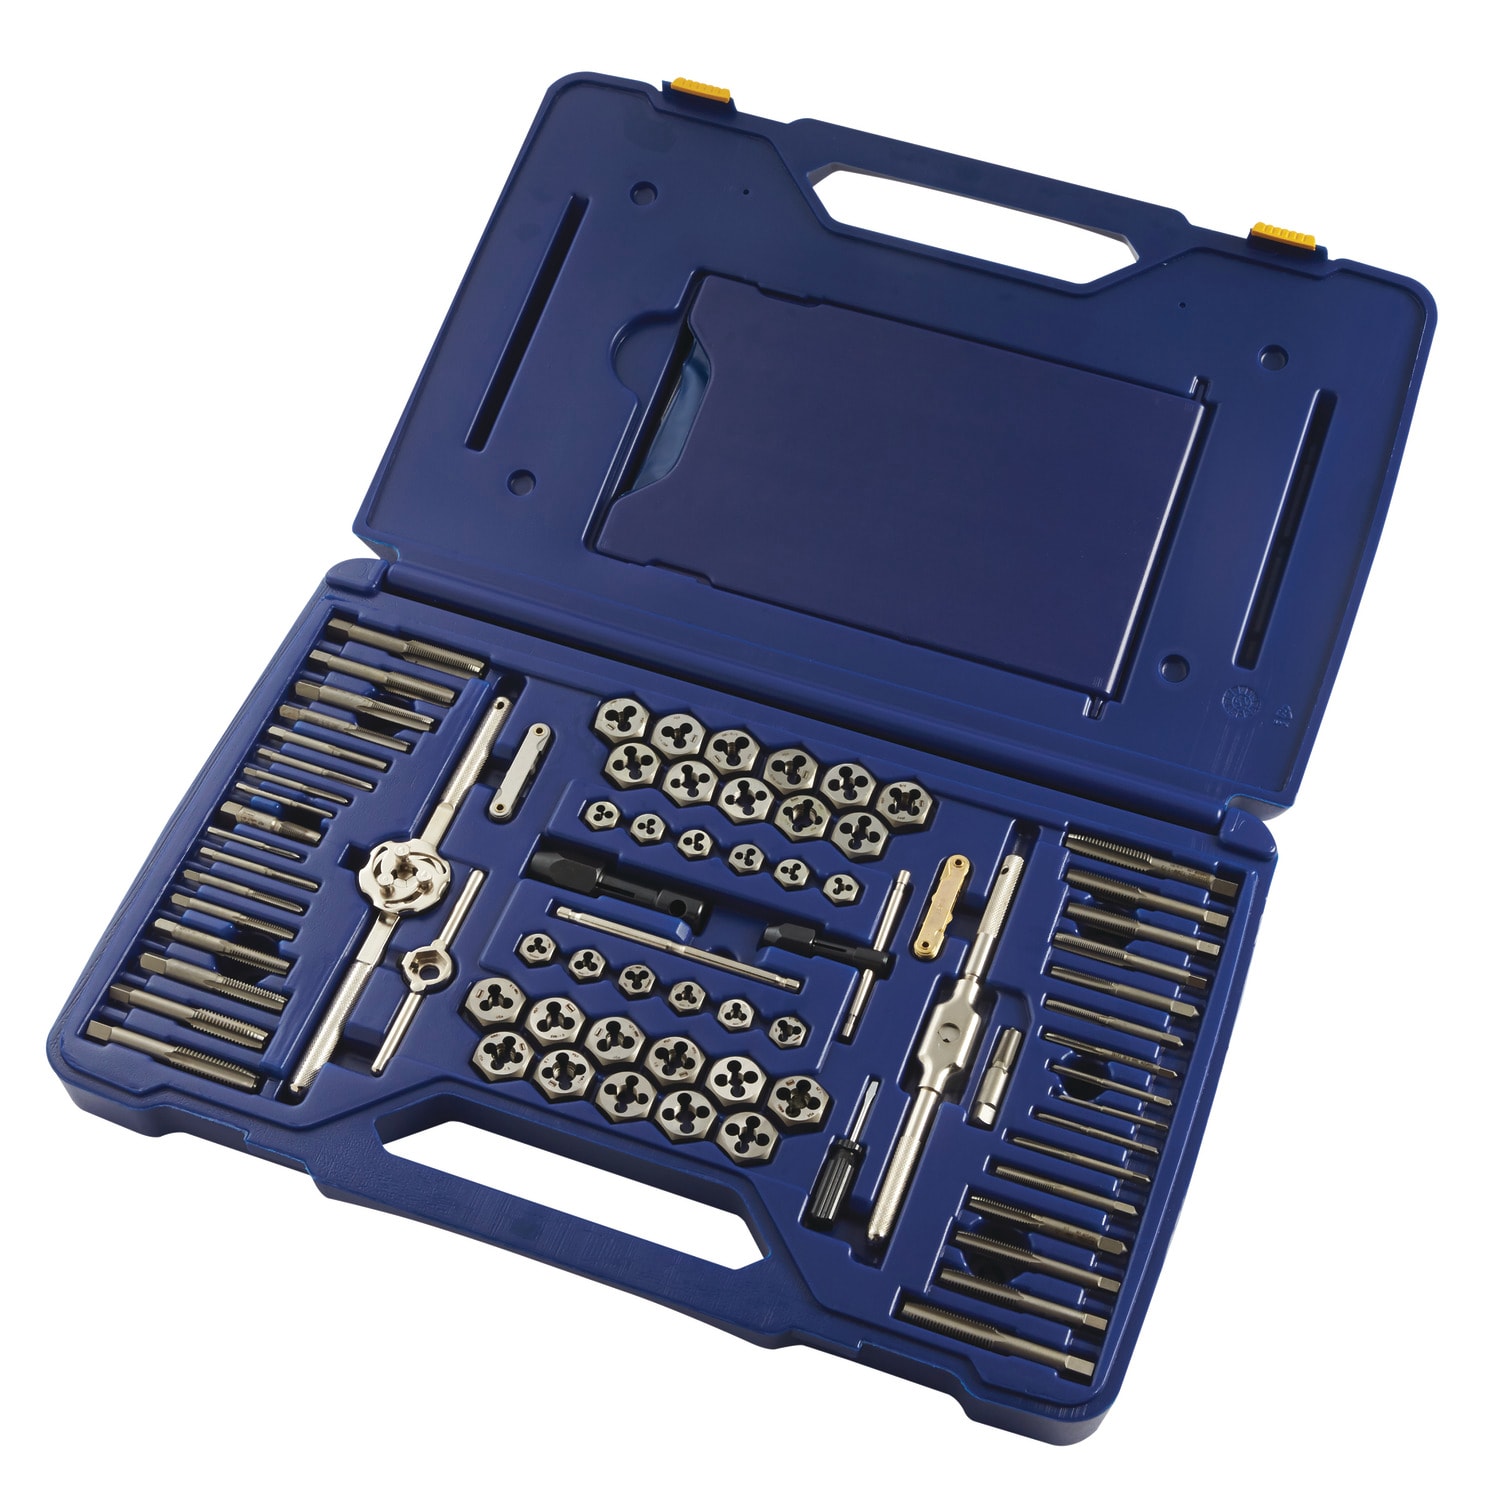 Include Both SAE Inch and Metric 24313 9999 60-Piece Master Tap and Die Set 